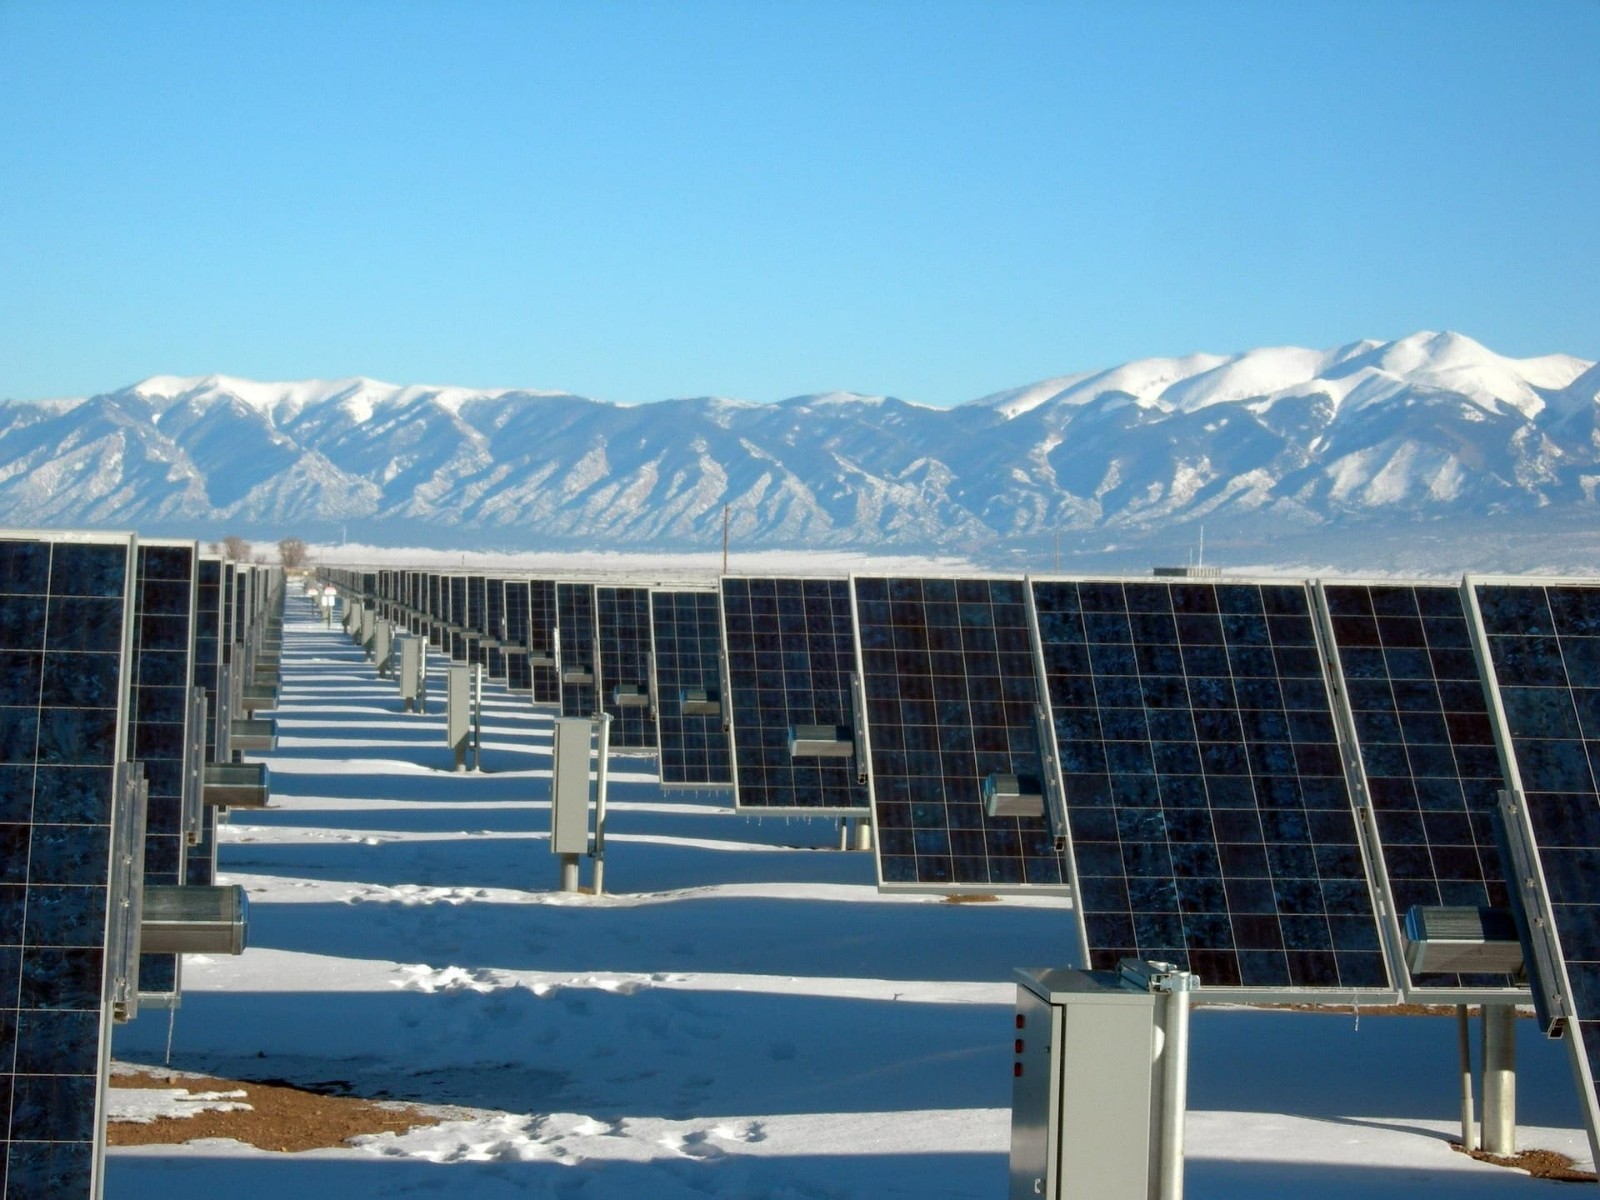 Solar testing group warns of degradation risk for TOPcon